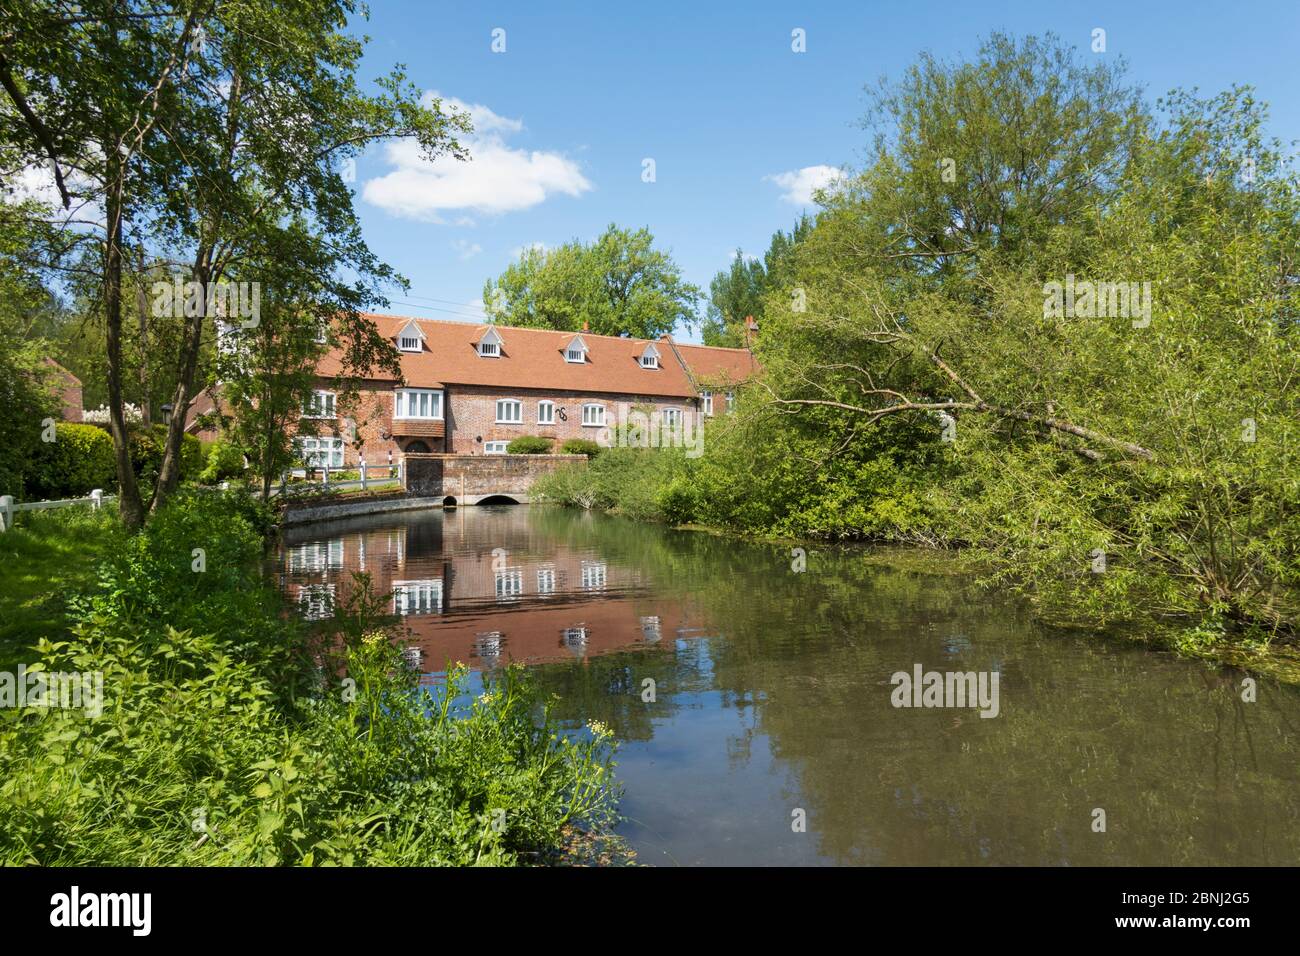 Lower Denford Mill sul fiume Kennett, Hungerford, West Berkshire, Inghilterra, Regno Unito, Europa Foto Stock